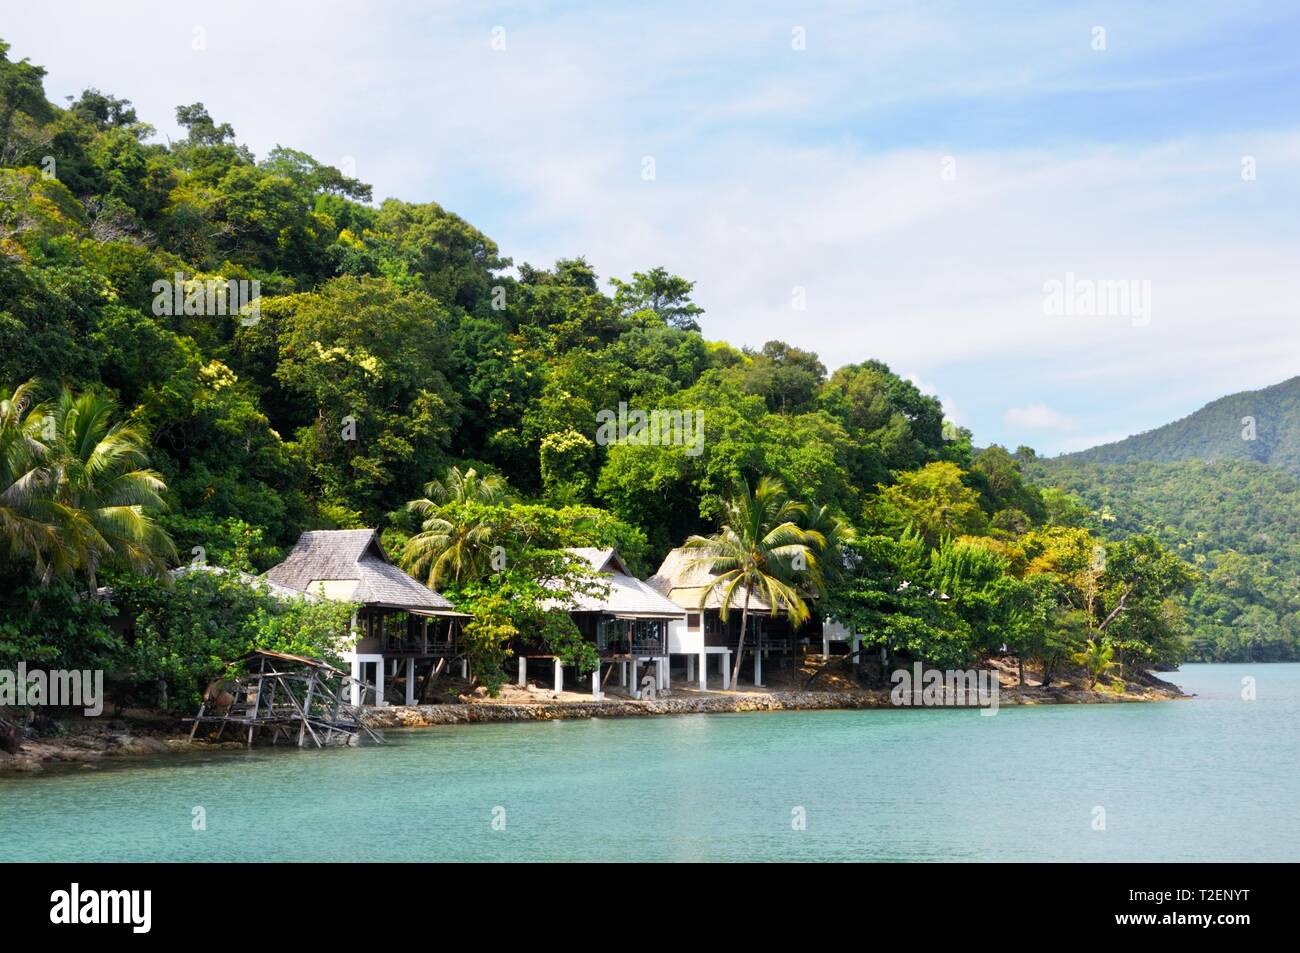 Tropical resort with bulgalows at the coastline of the Koh Chang island, Thailand. Stock Photo